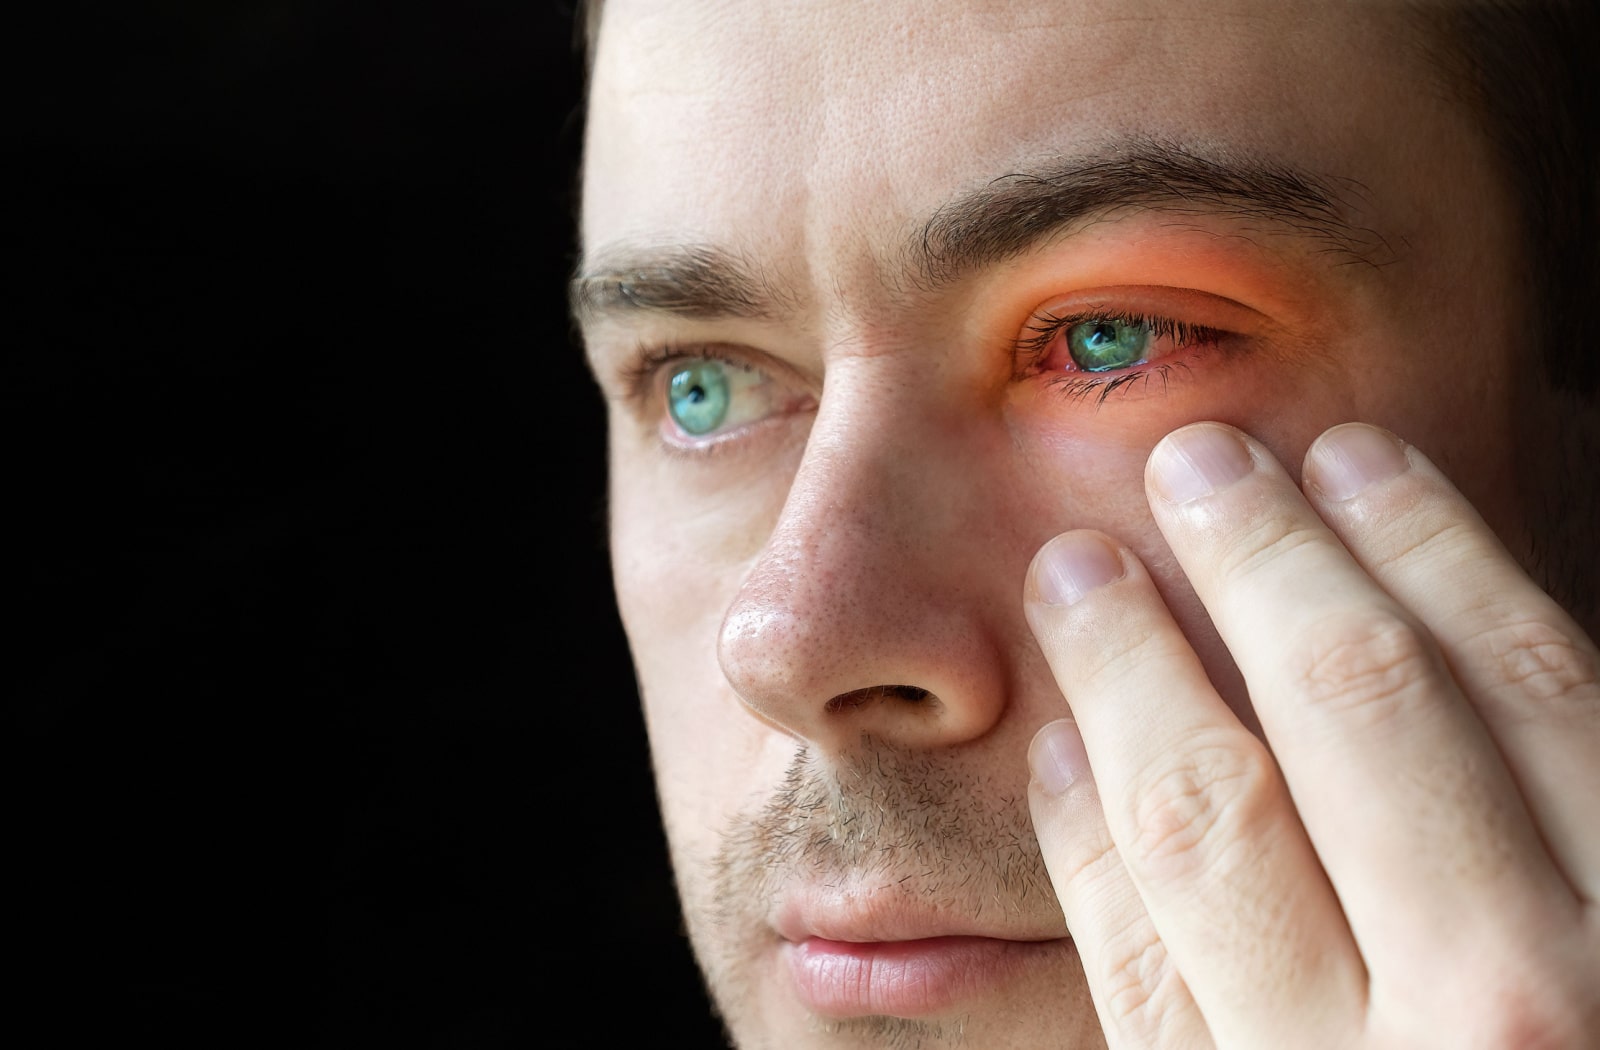 A man puts his hand up by his red eye due to eye pain